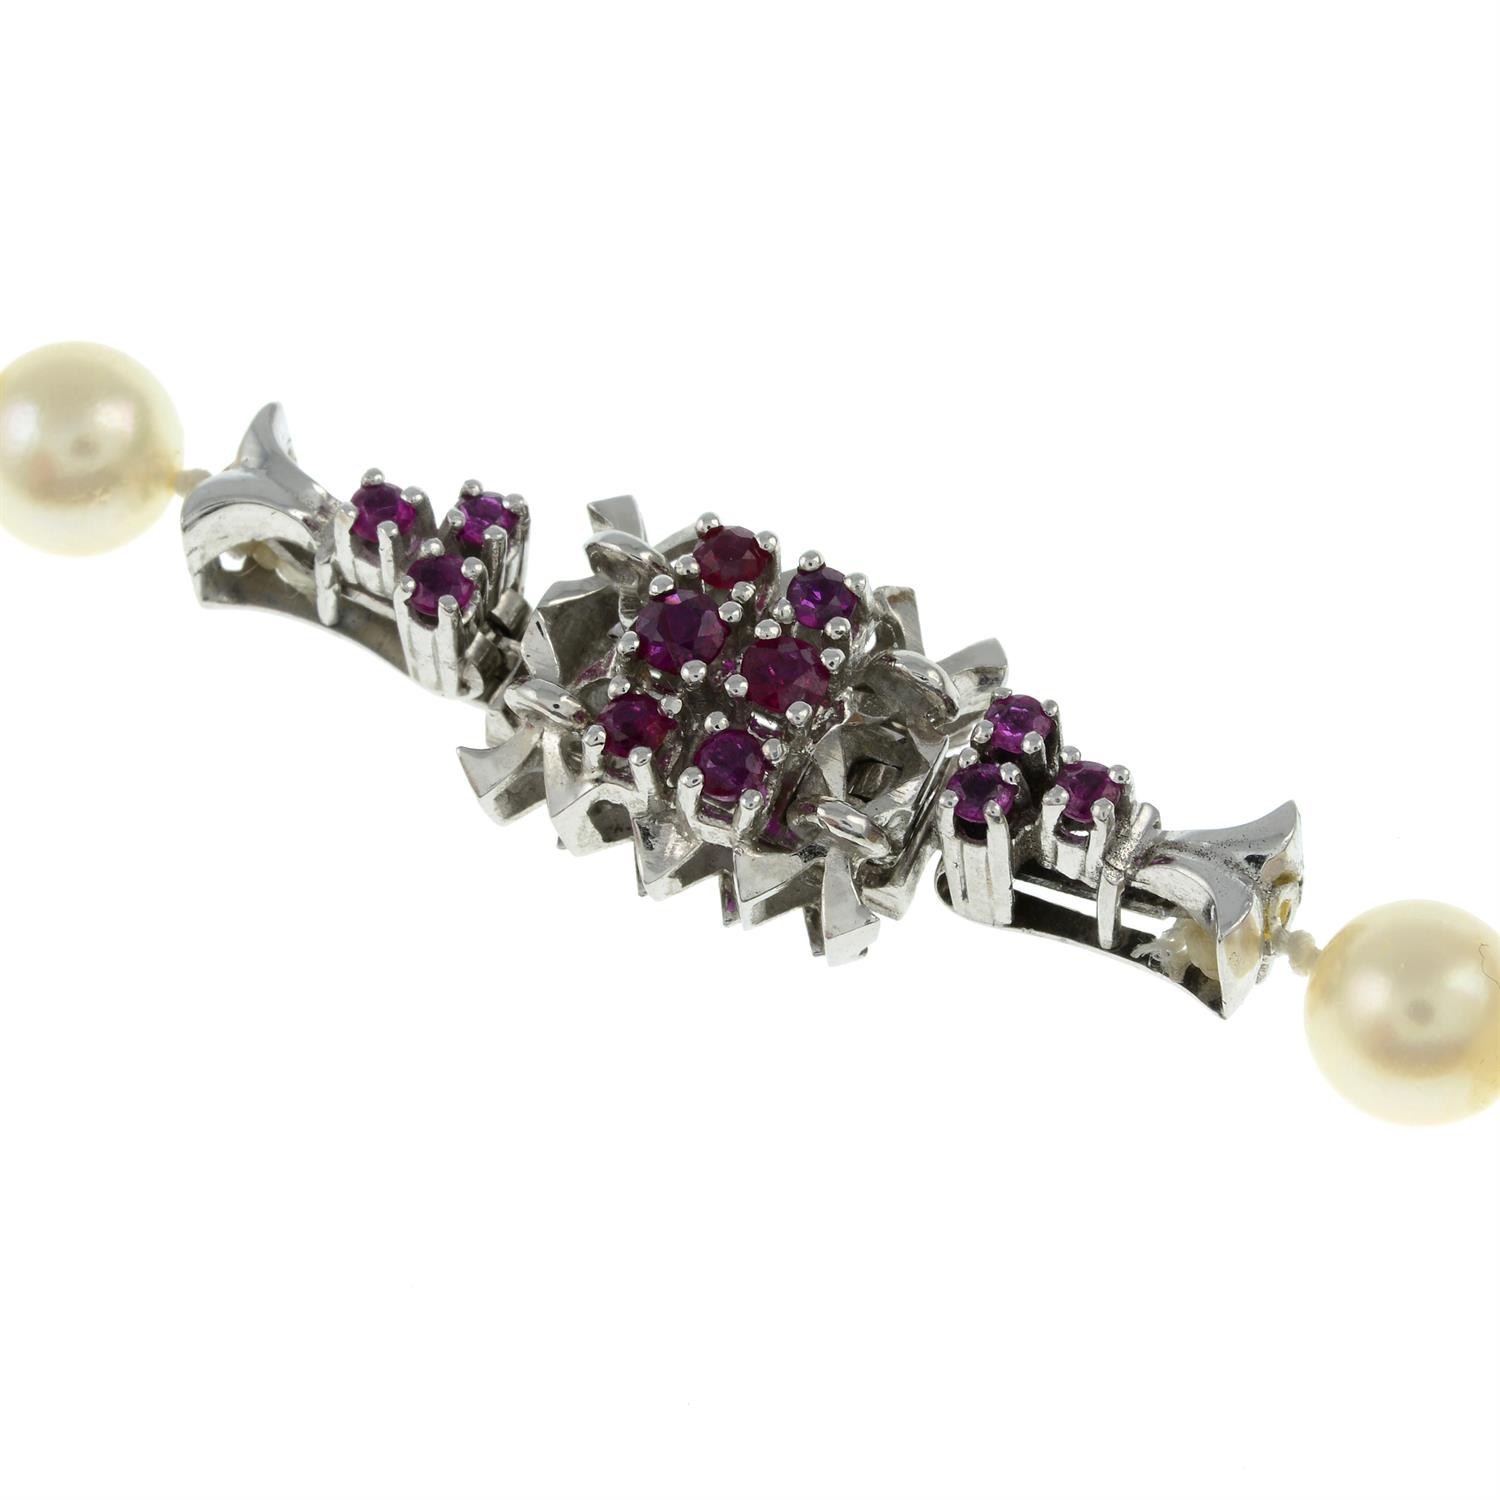 Cultured pearl necklace, with ruby clasp - Image 2 of 2